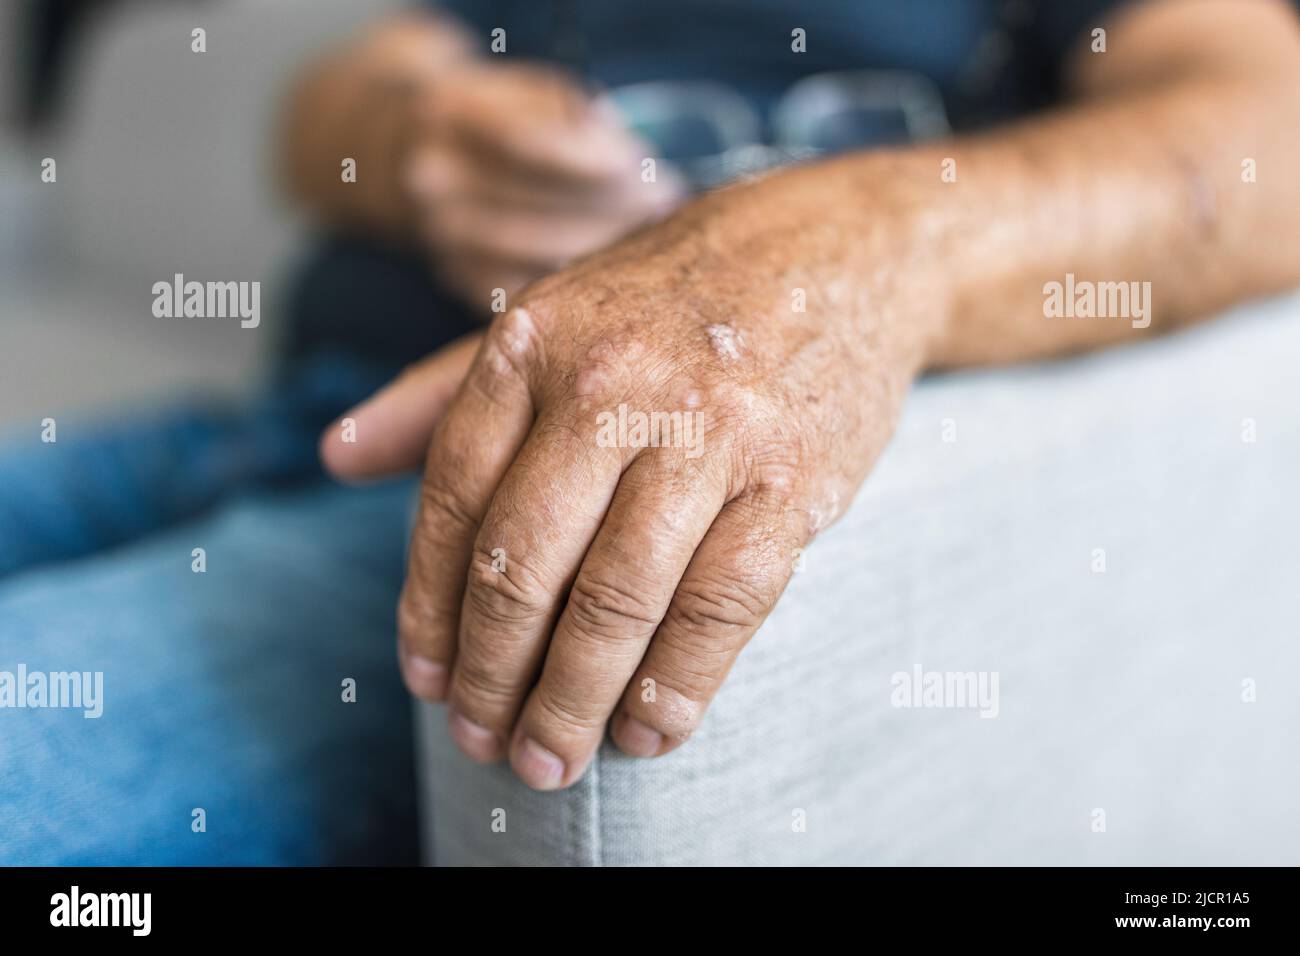 Elderly man suffering from psoriasis, closeup on hands Stock Photo